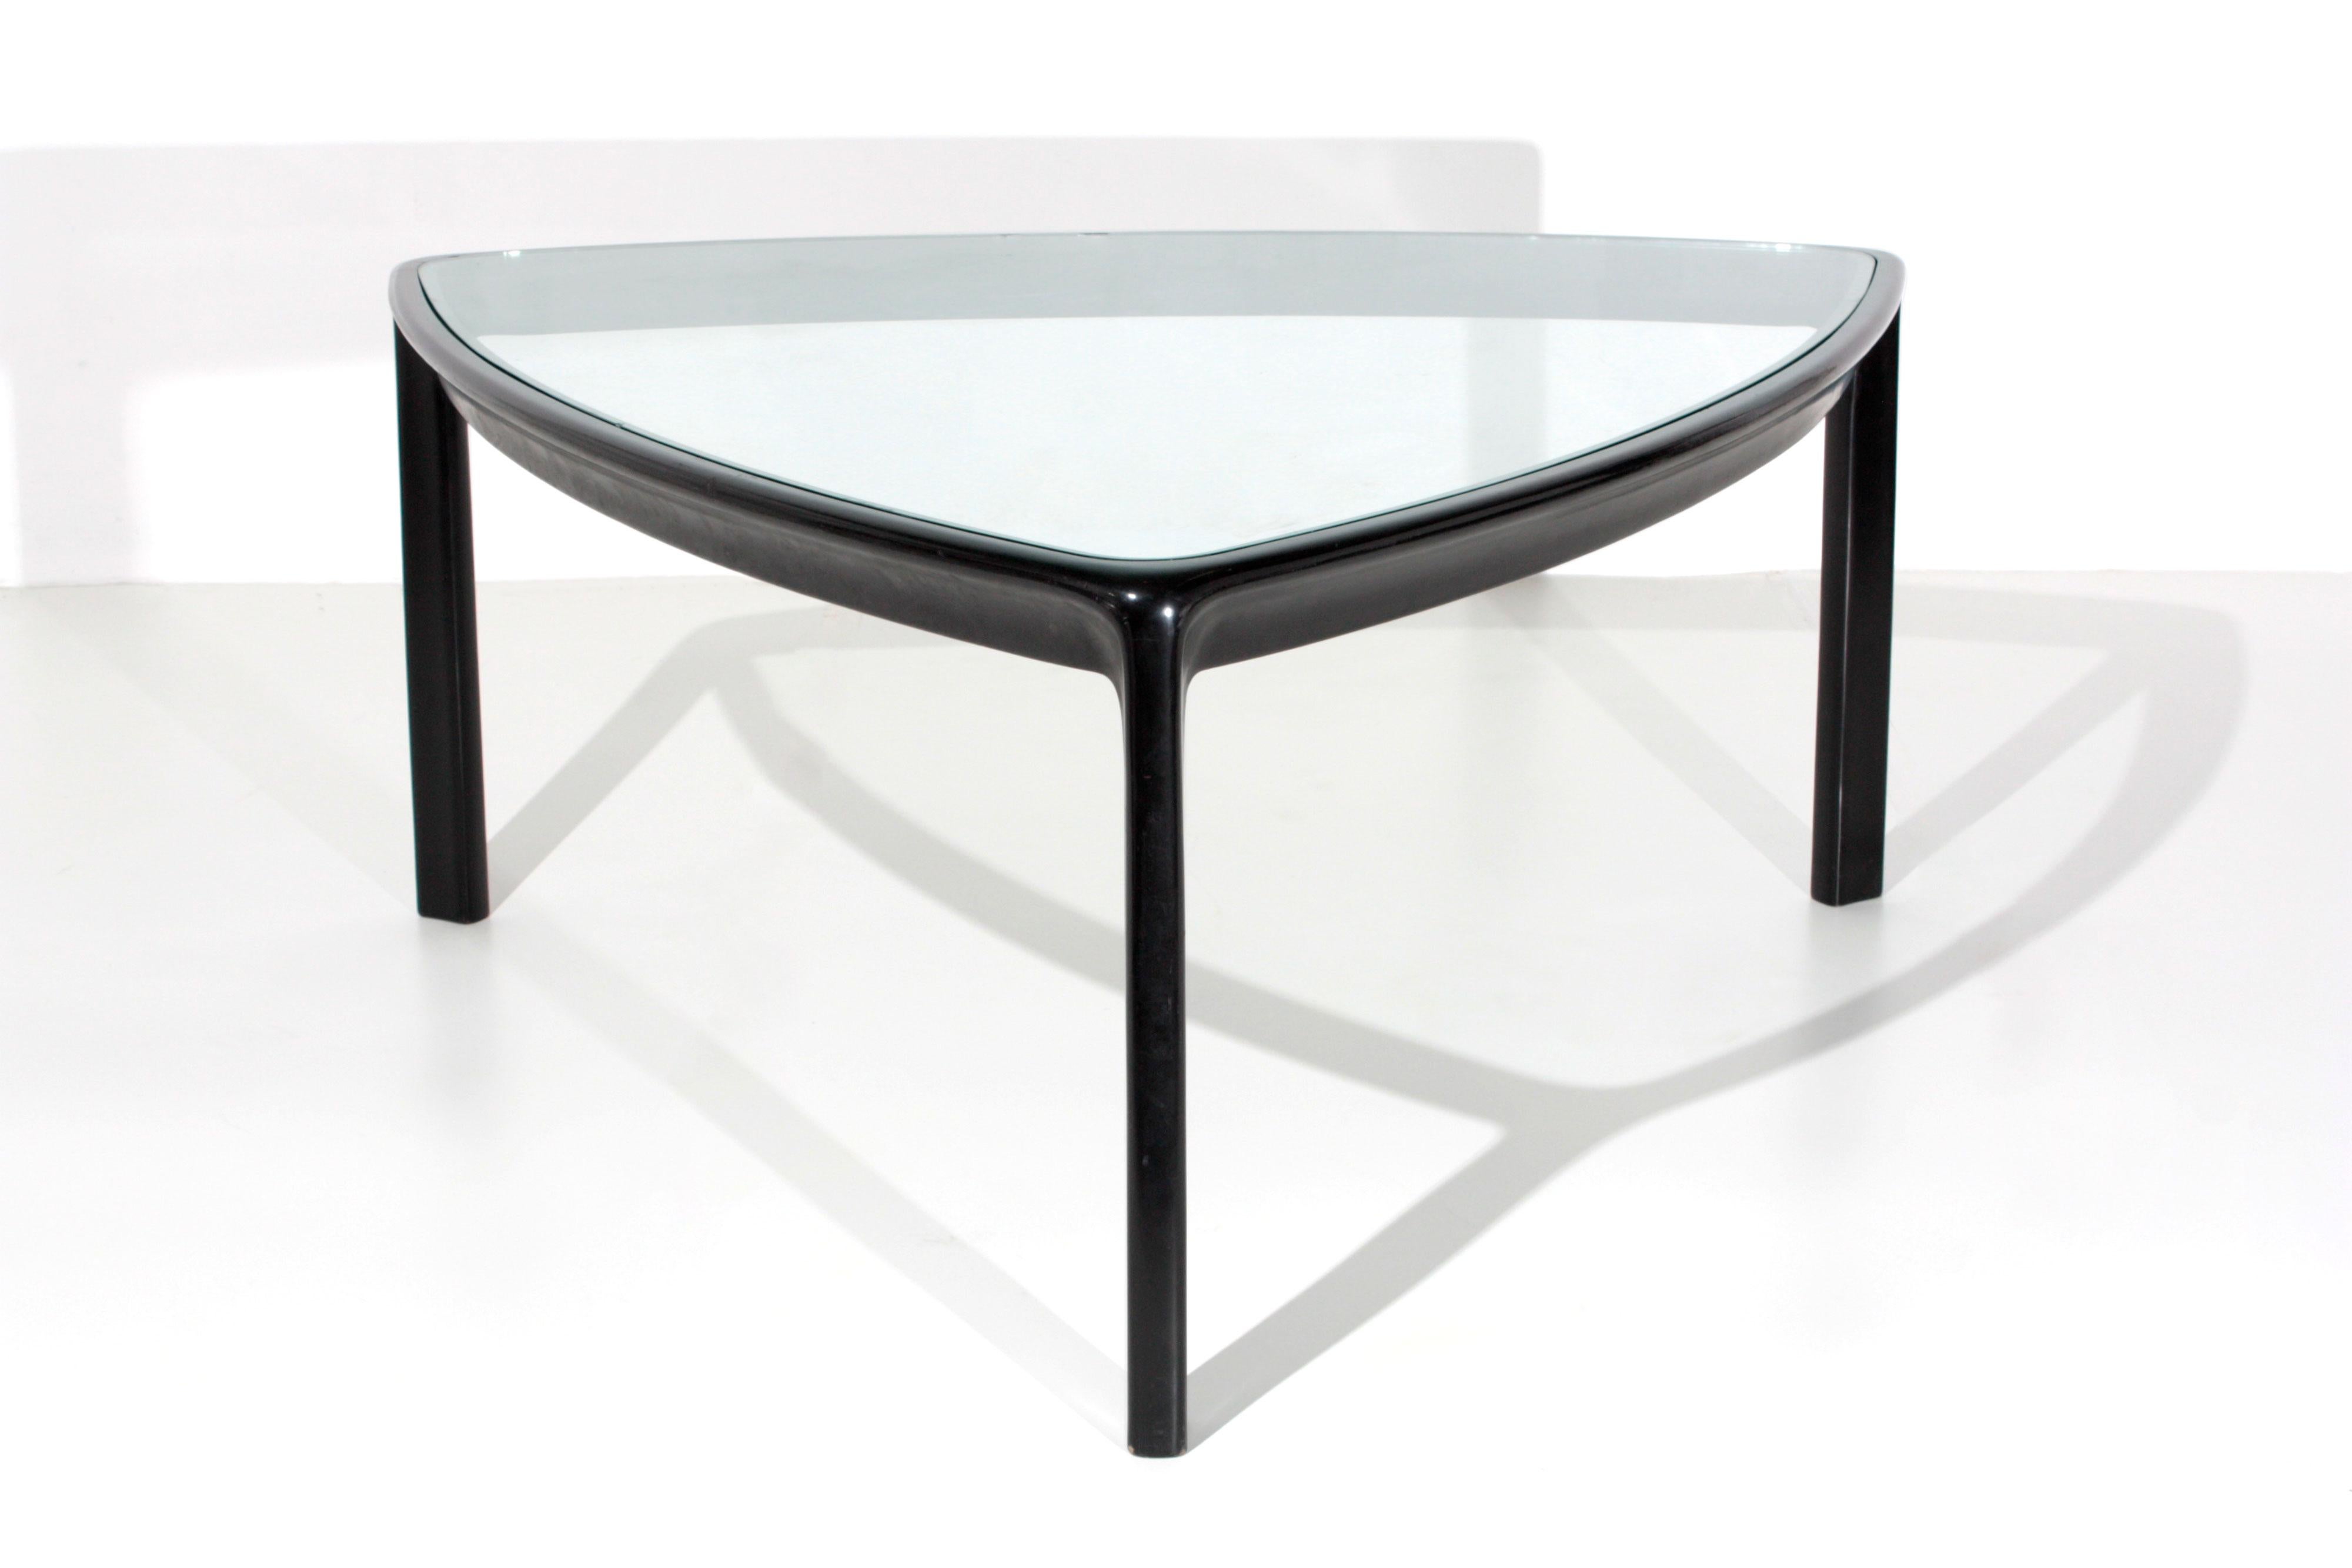 Large table designed by Angelo Mangiarotti for the Skipper production. The table has a slightly rounded triangular shape. Its structure is in wood with three pedestals. As a support base we find a glass top. The table is ideal to define living room